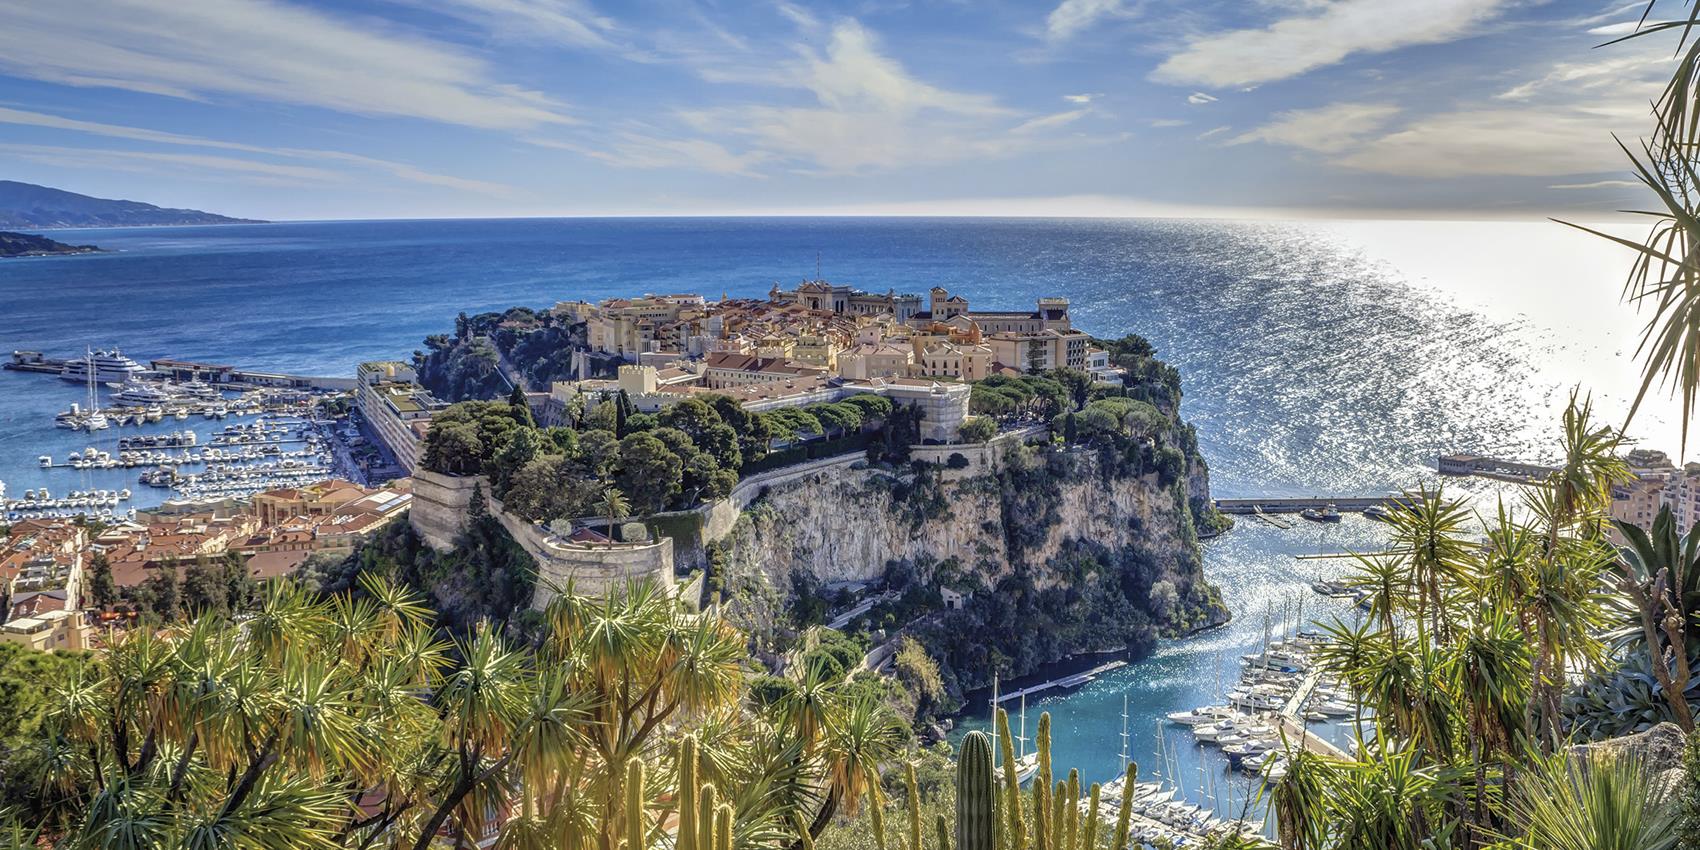 Have you ever wanted to visit Monaco?